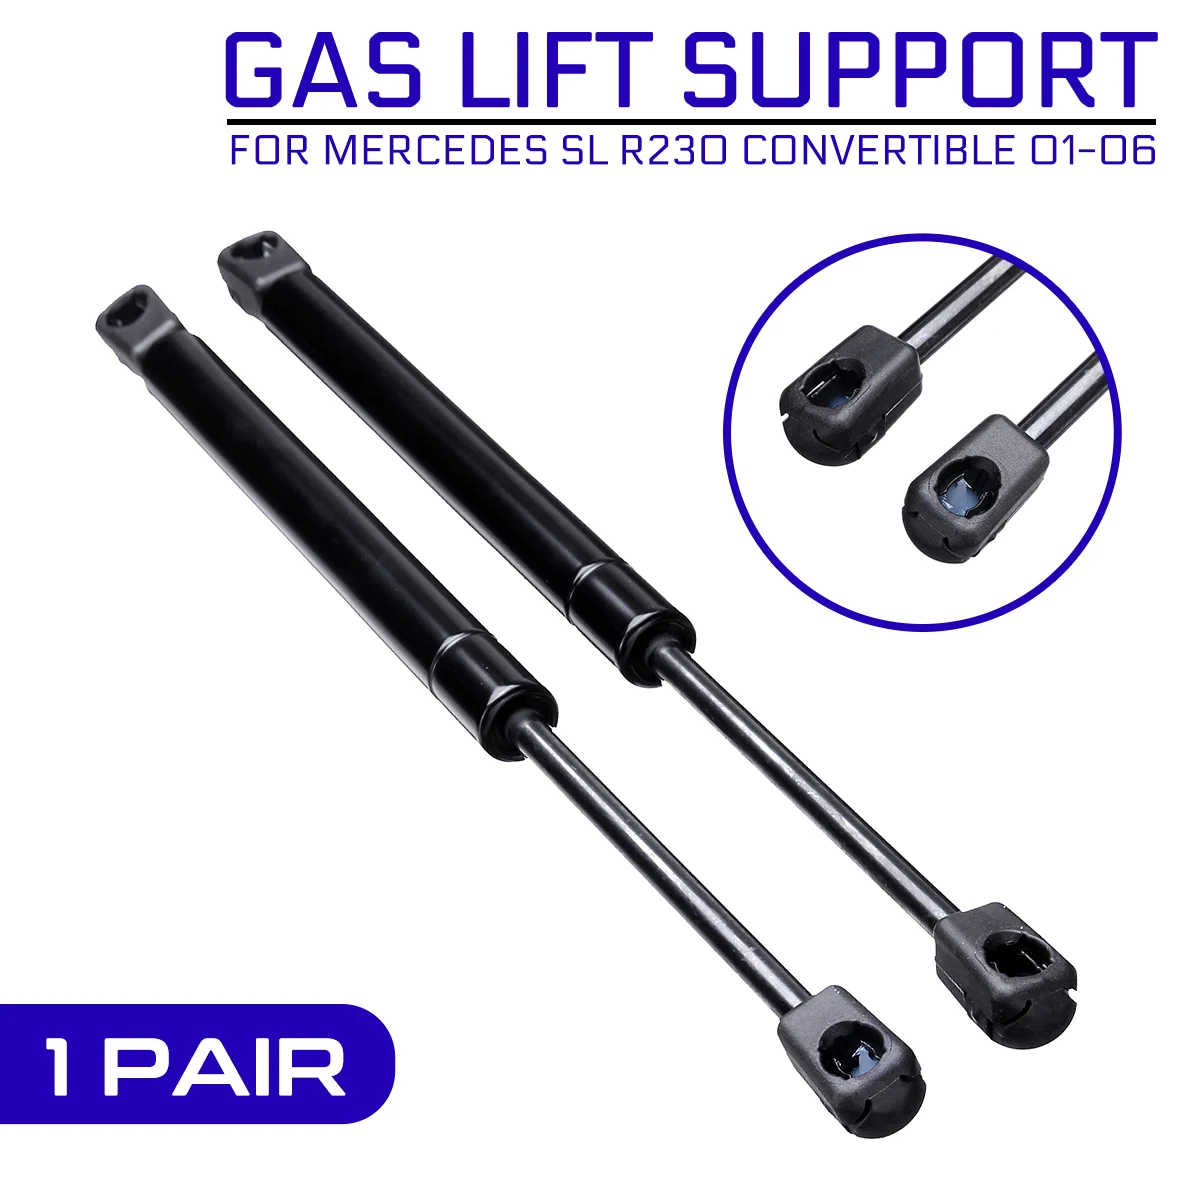 

Rear Trunk Tailgate Gas Spring Shock Lift Strut Support Rod Arm Bars Bracket For Mercedes for Benz SL R230 Convertible 2001-2006